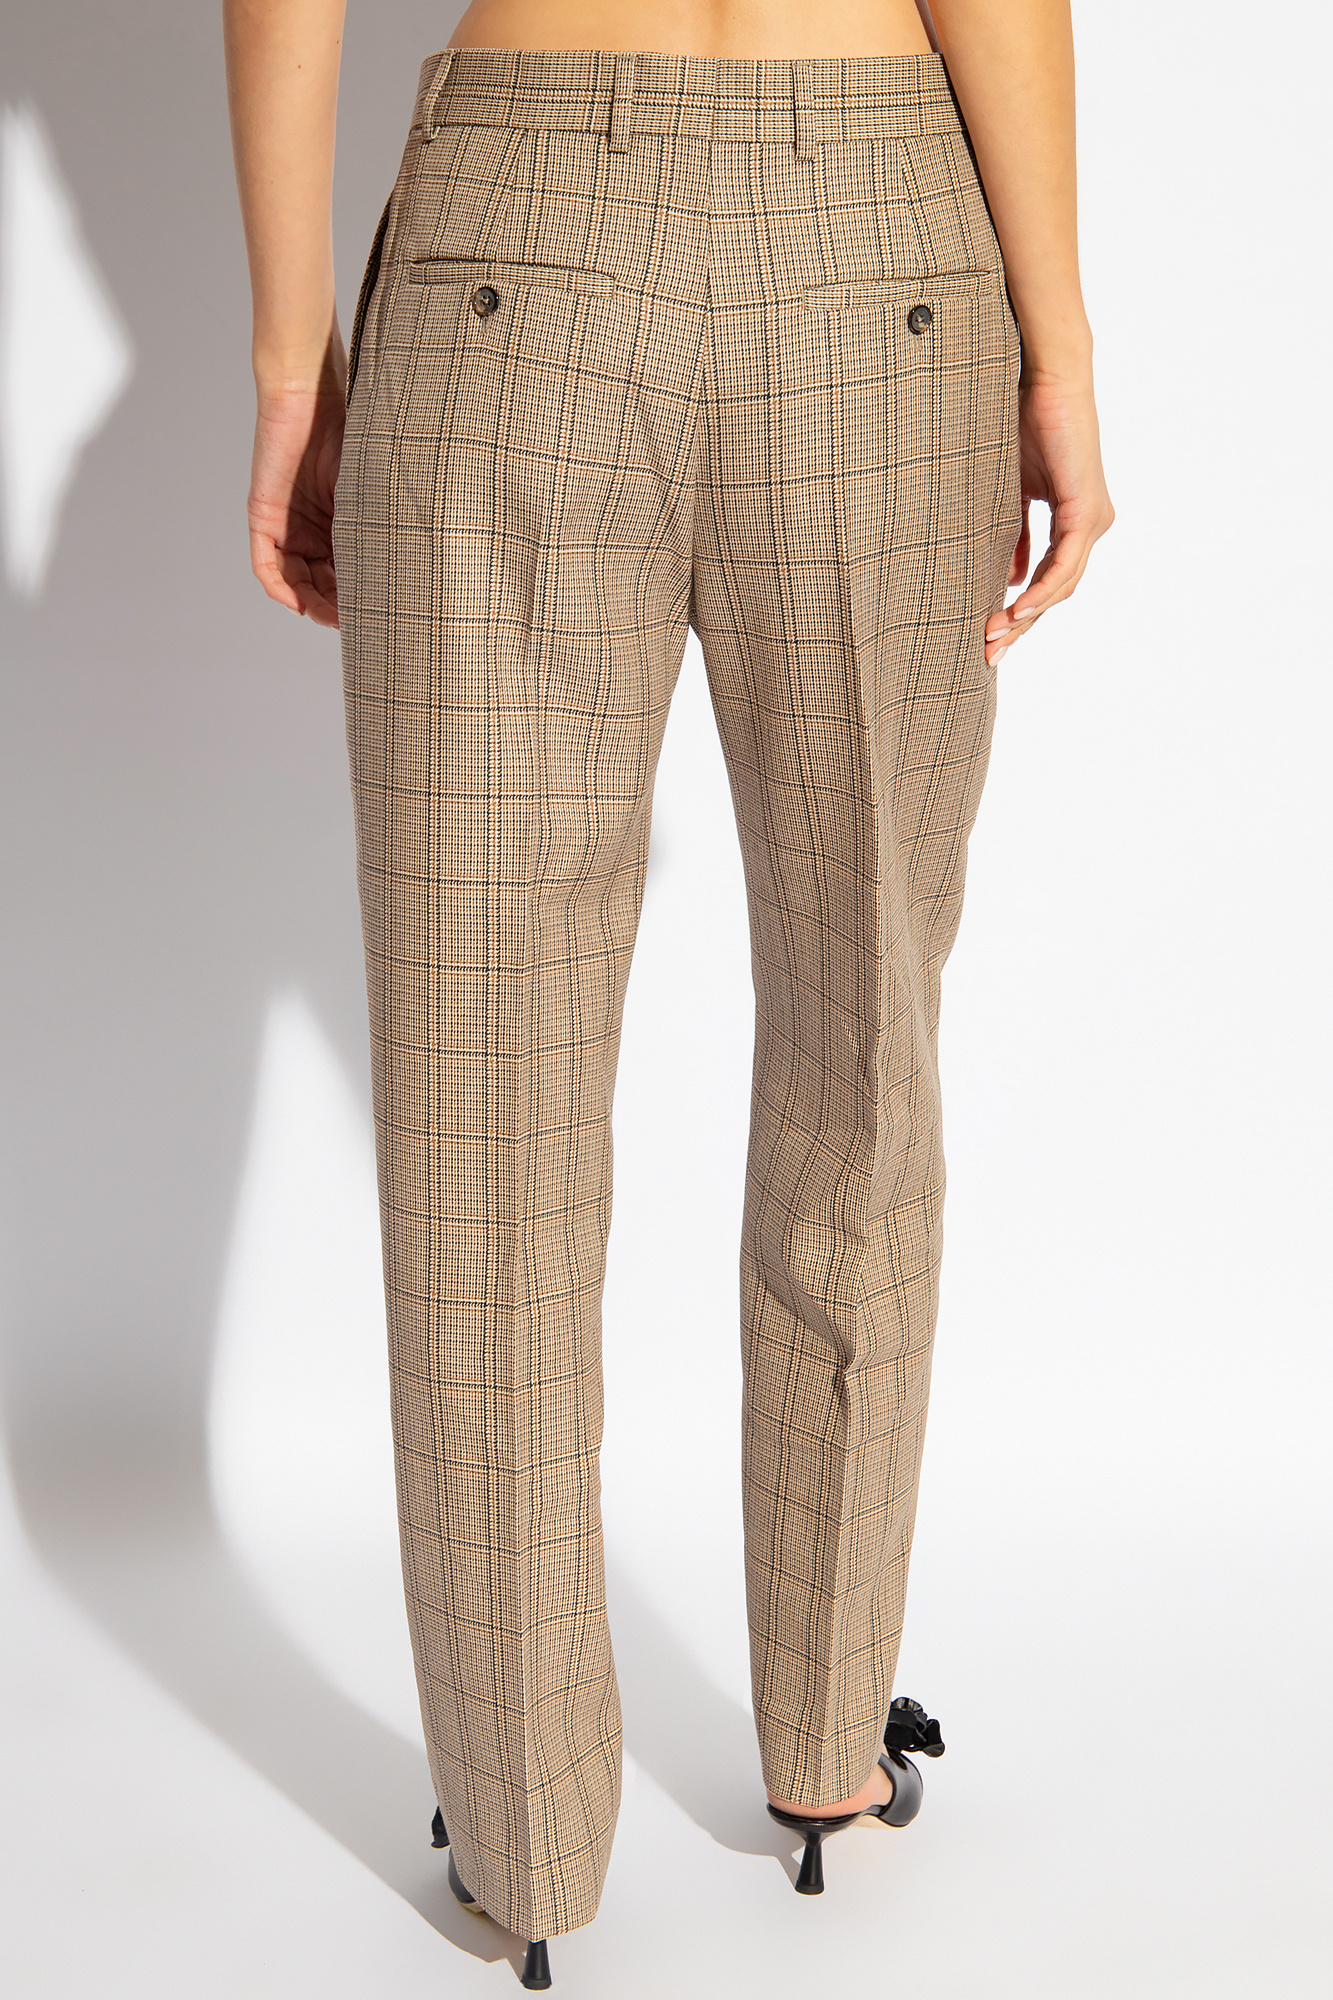 TOTEME Wool pleat-front trousers